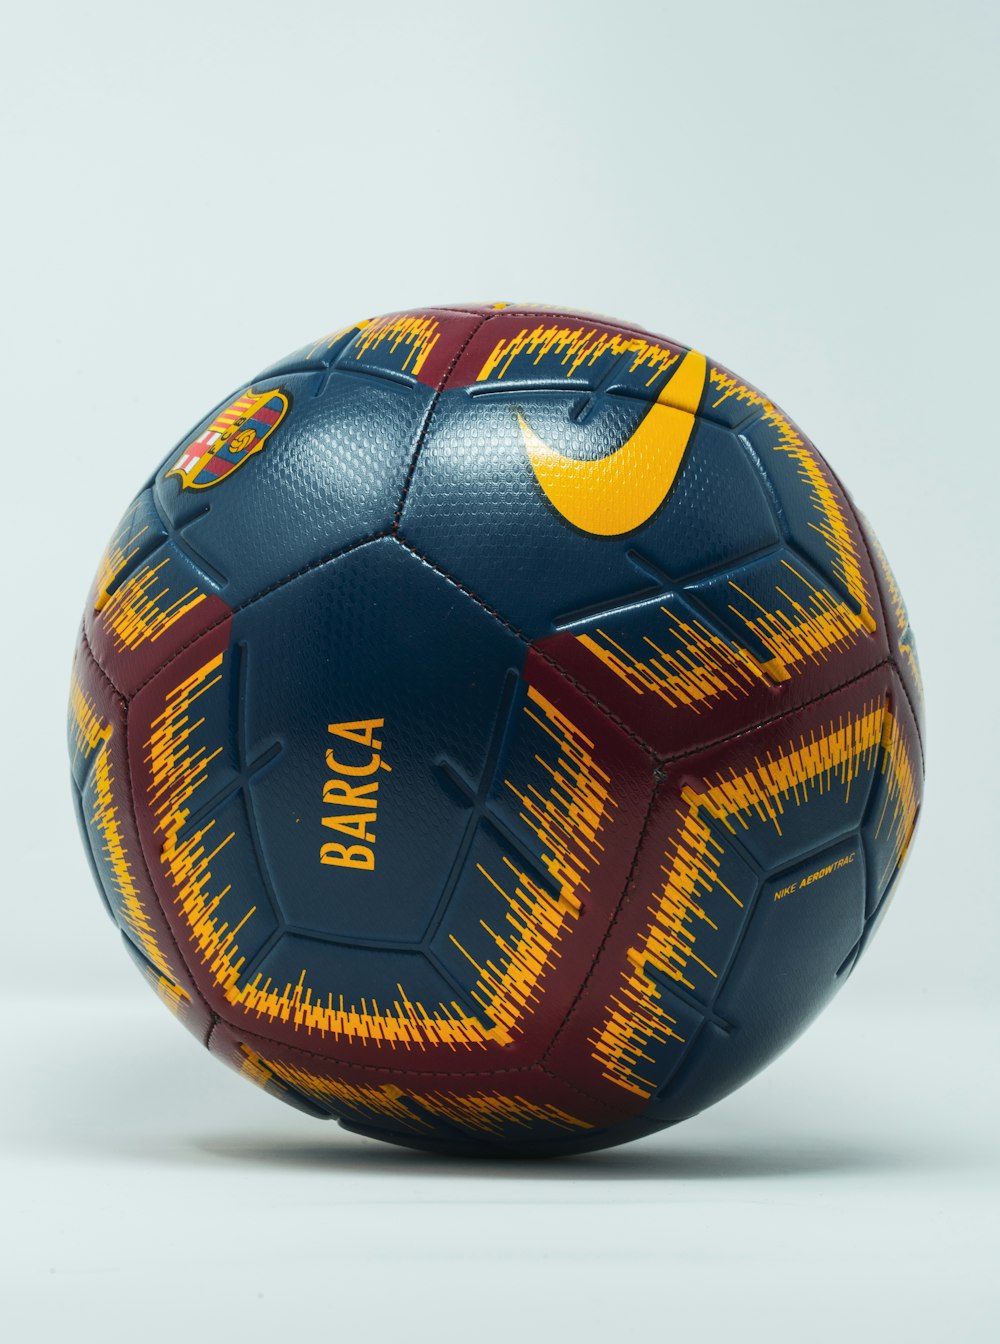 blue, maroon, and yellow Nike soccer ball photo – Free Sport Image on  Unsplash